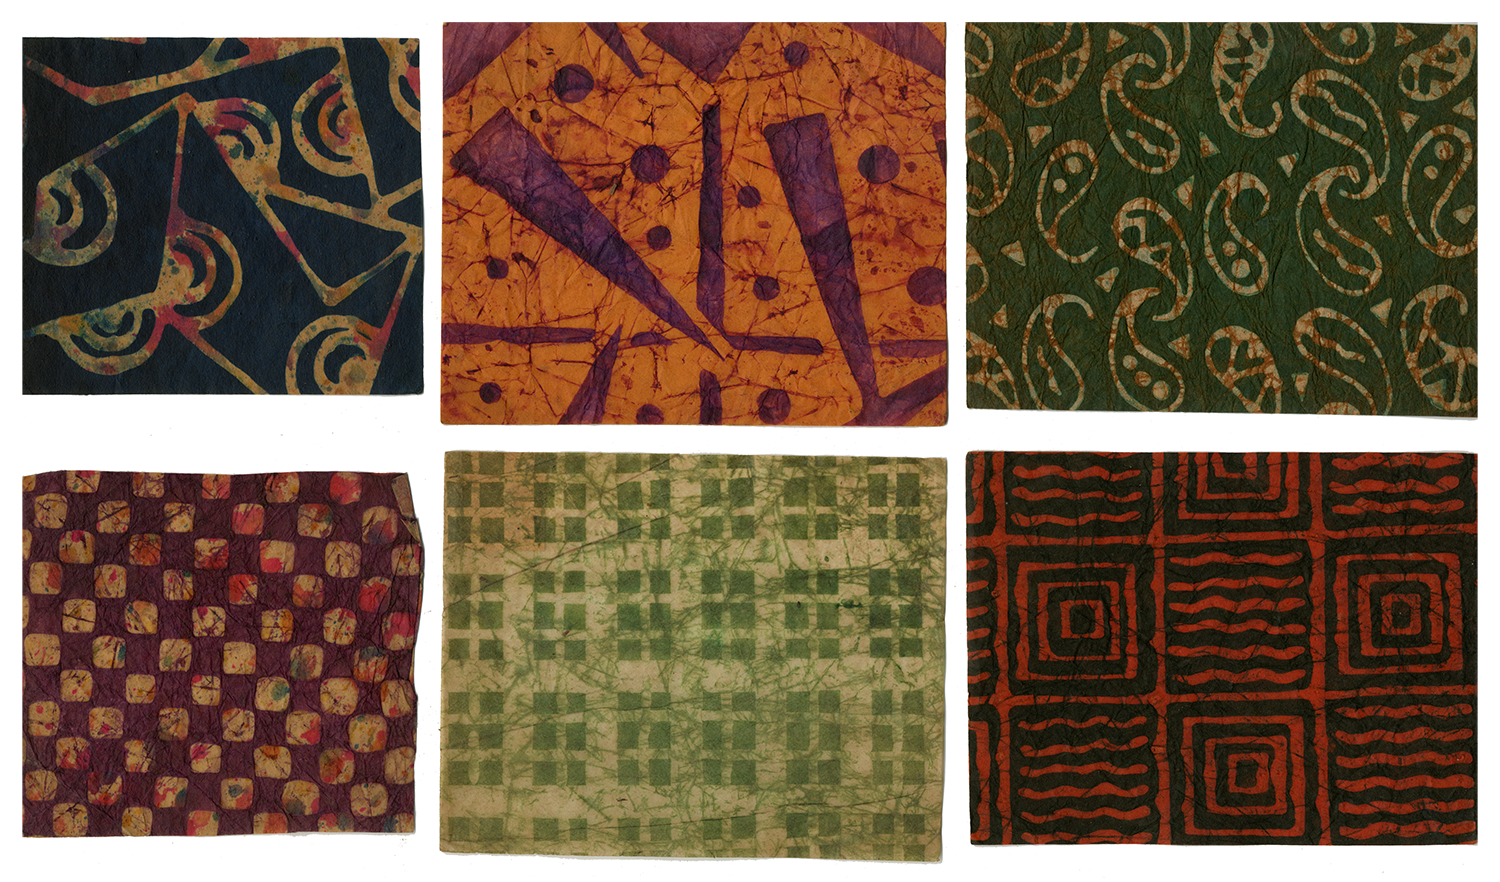 Six examples of batik paper - top row from left to right: black and yellow geometric pattern, yellow and purple geometric pattern, green and yellow paisley pattern; bottom row: purple and yellow checkered pattern, green and white rectangle checked pattern, black and red lined pattern